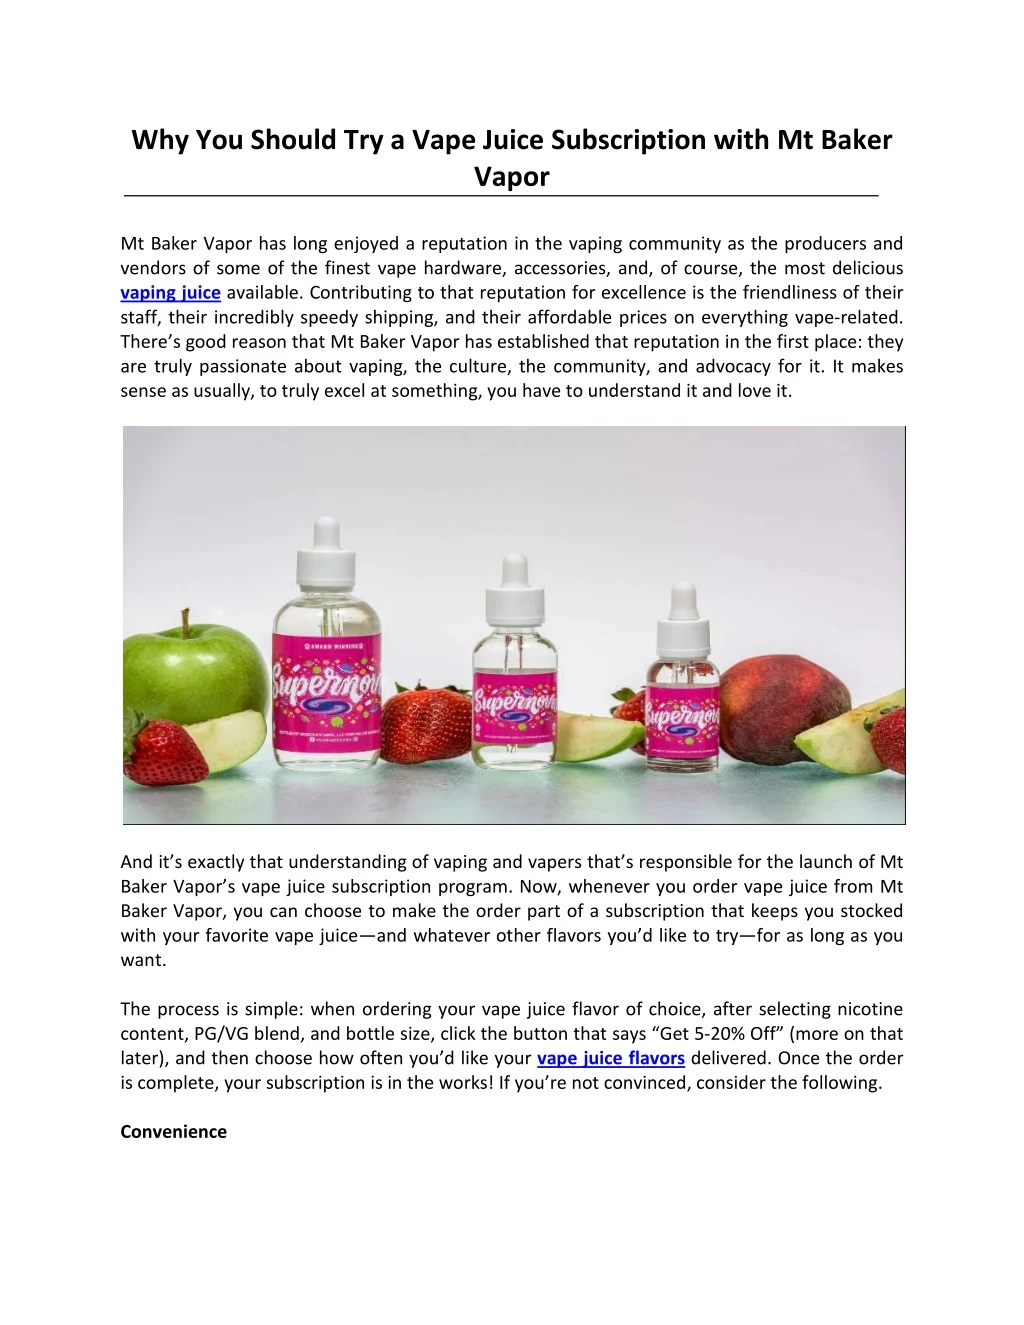 why you should try a vape juice subscription with